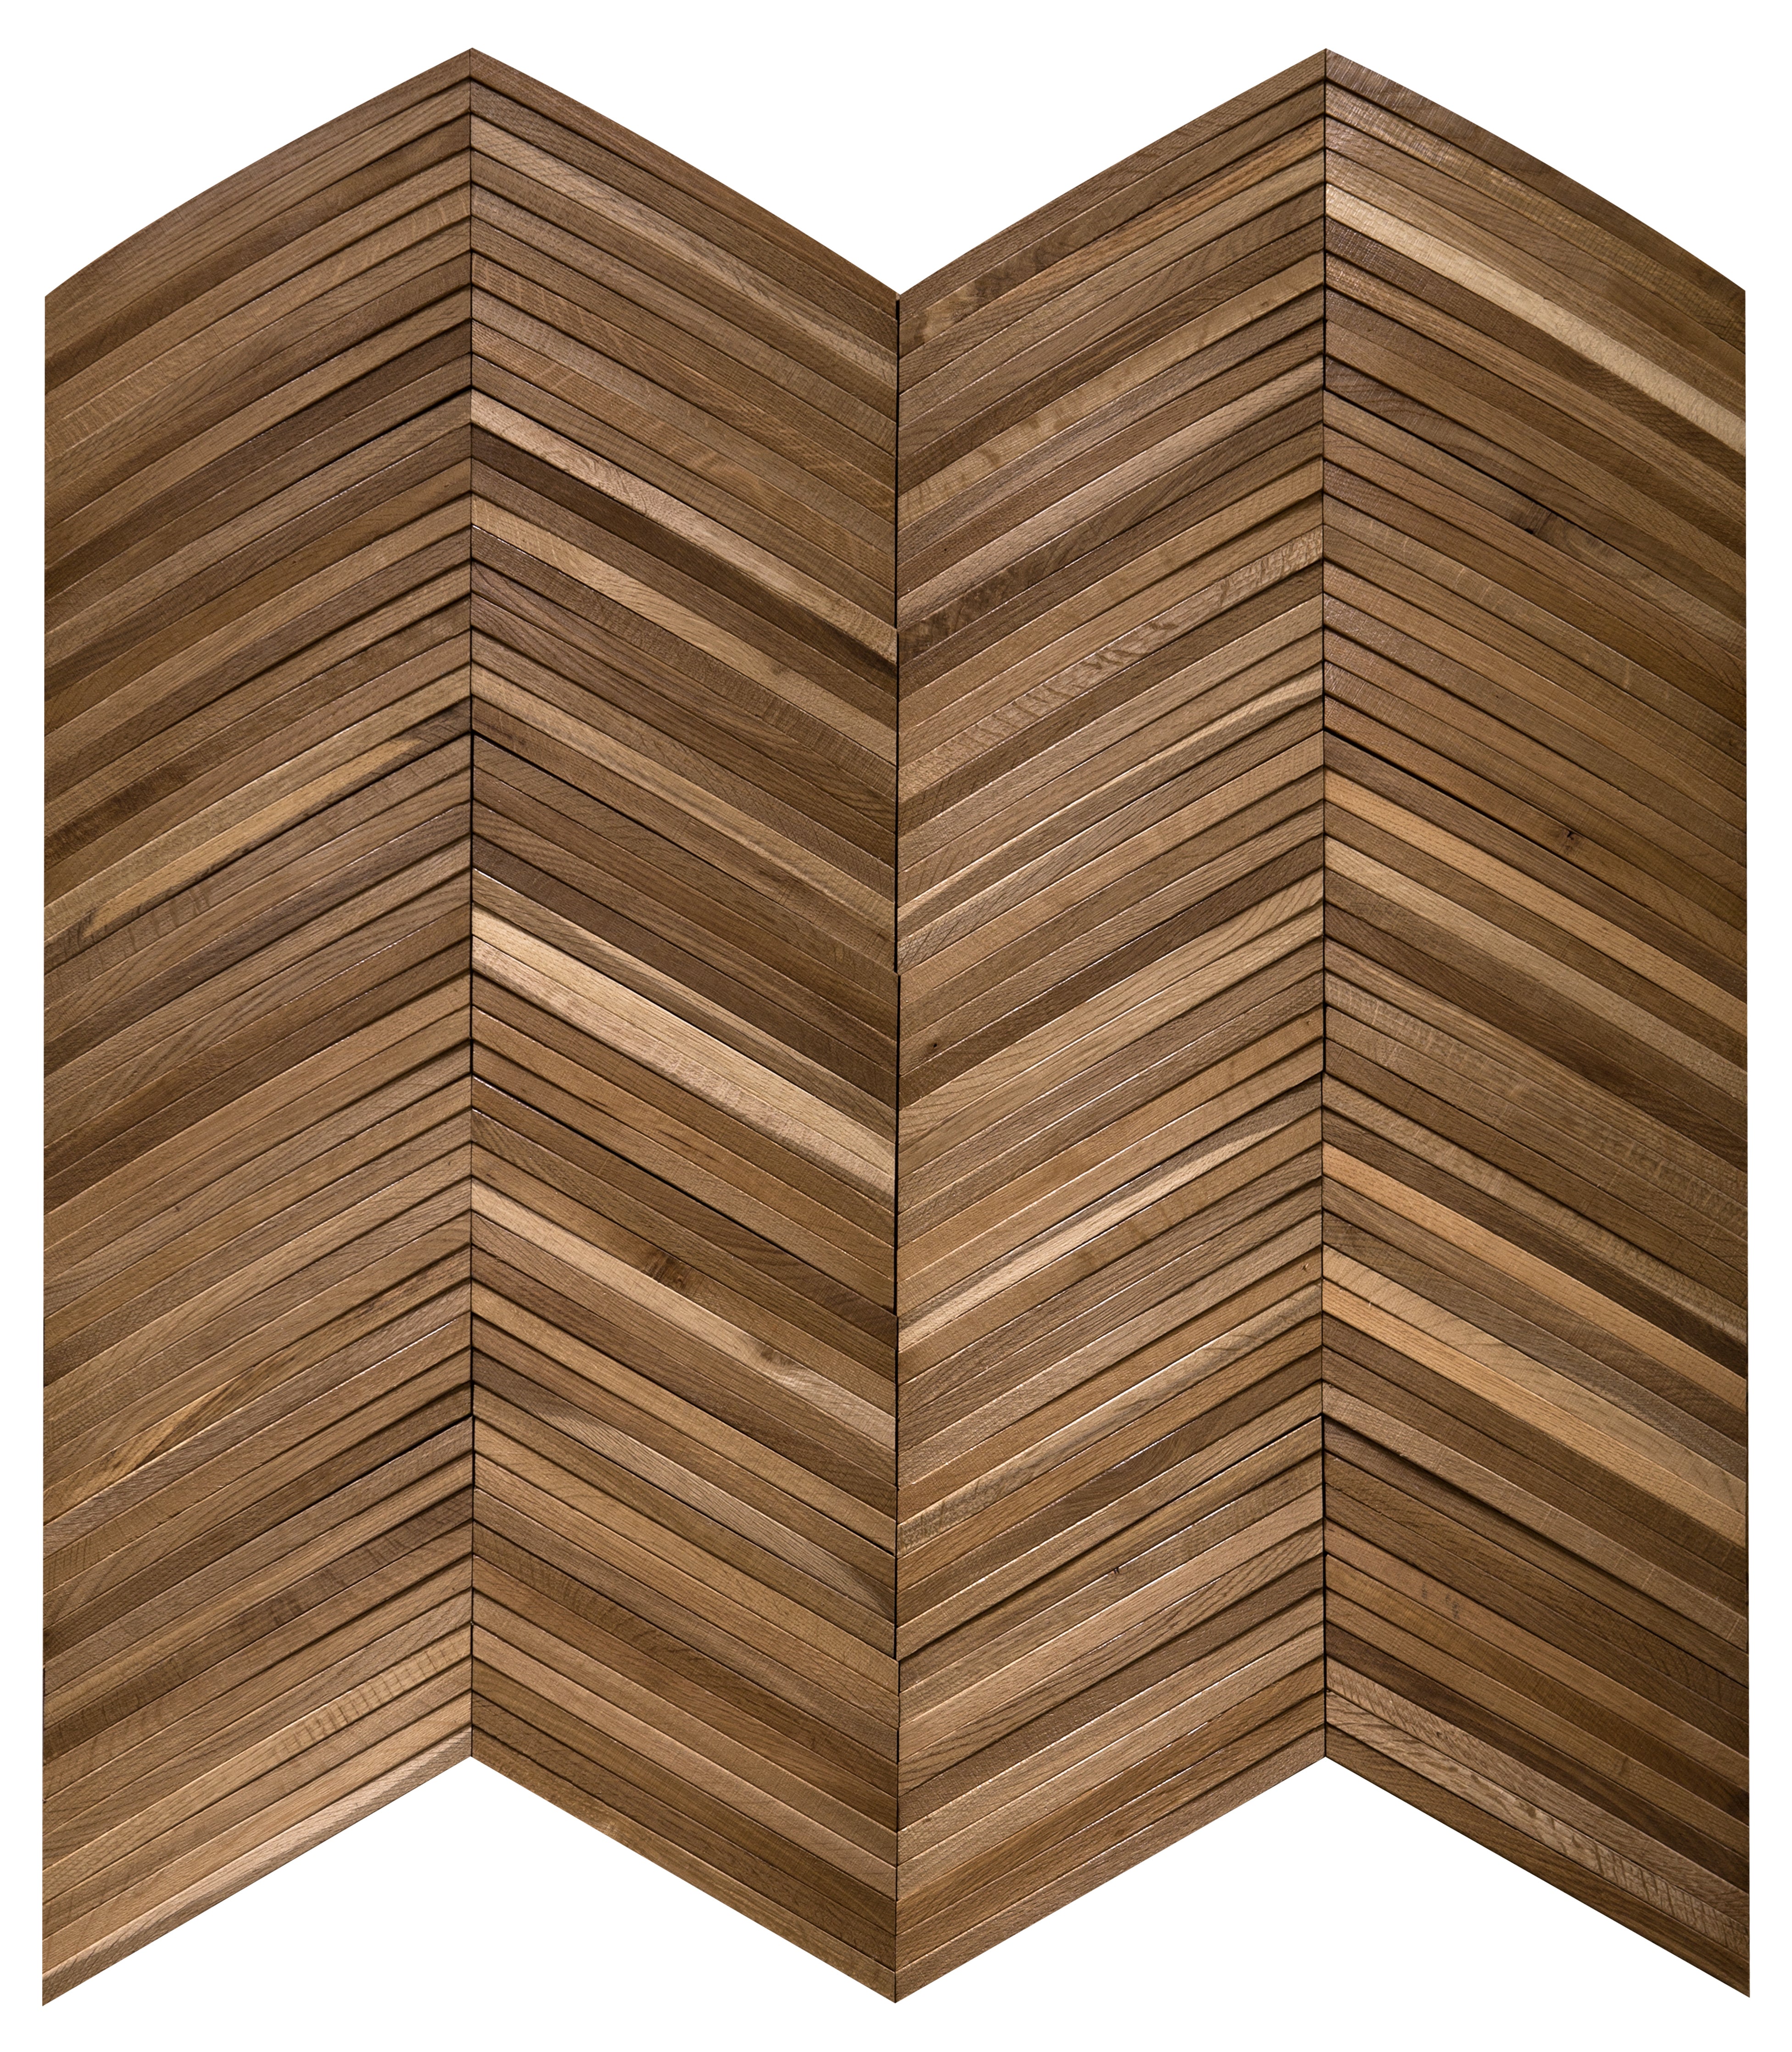 duchateau inceptiv ark chevron olde dutch oak three dimensional wall natural wood panel lacquer for interior use distributed by surface group international